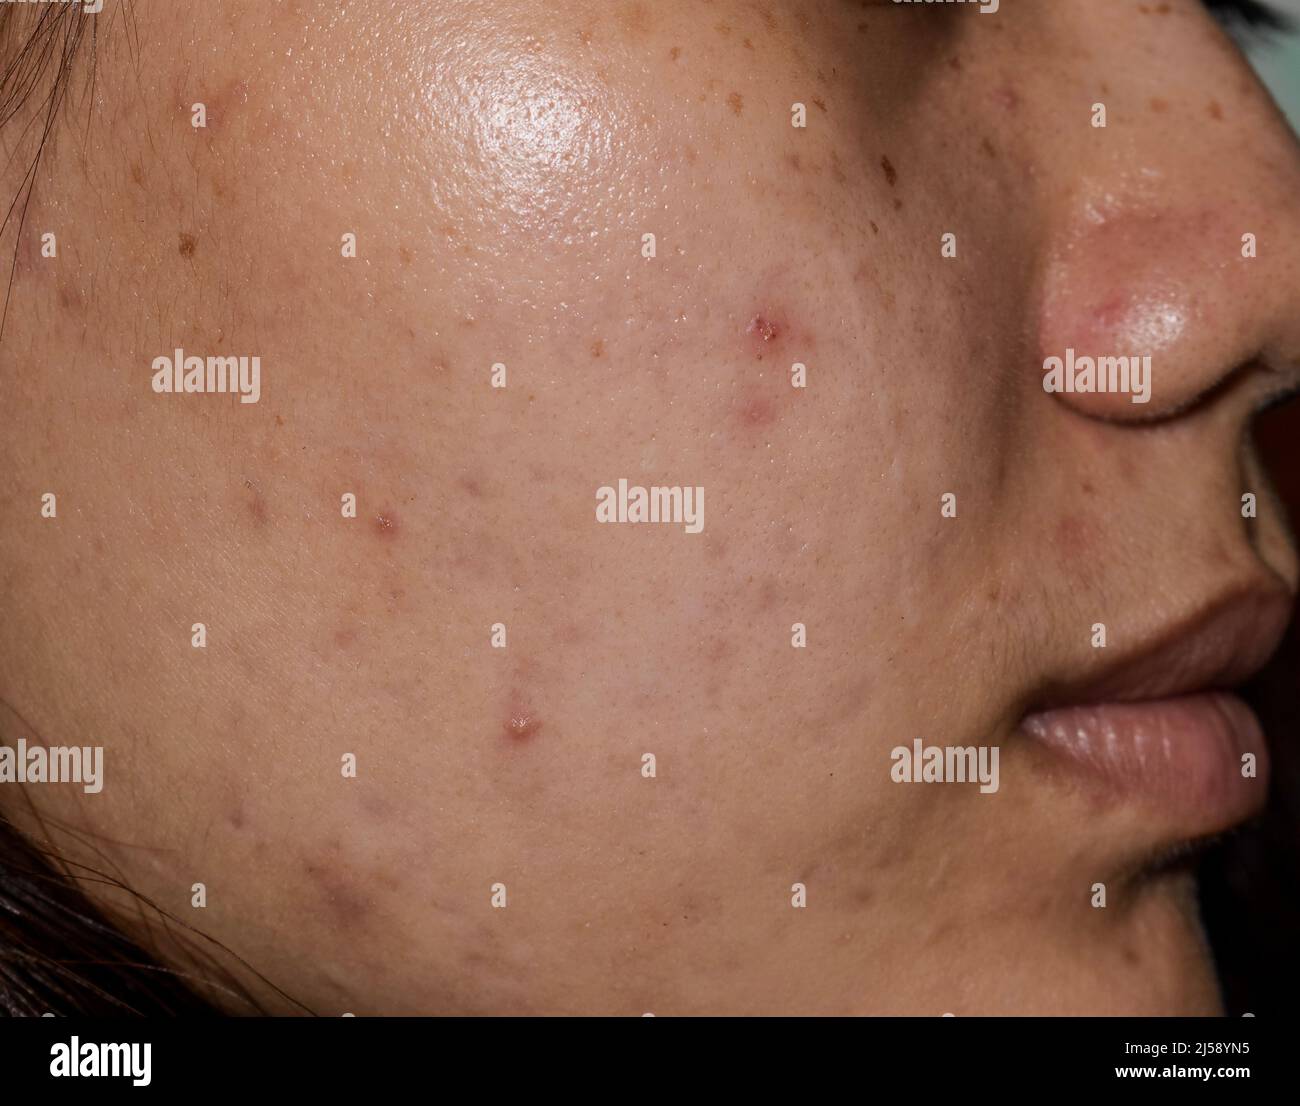 Acne, dark spots and scars on face of Asian young woman. Stock Photo